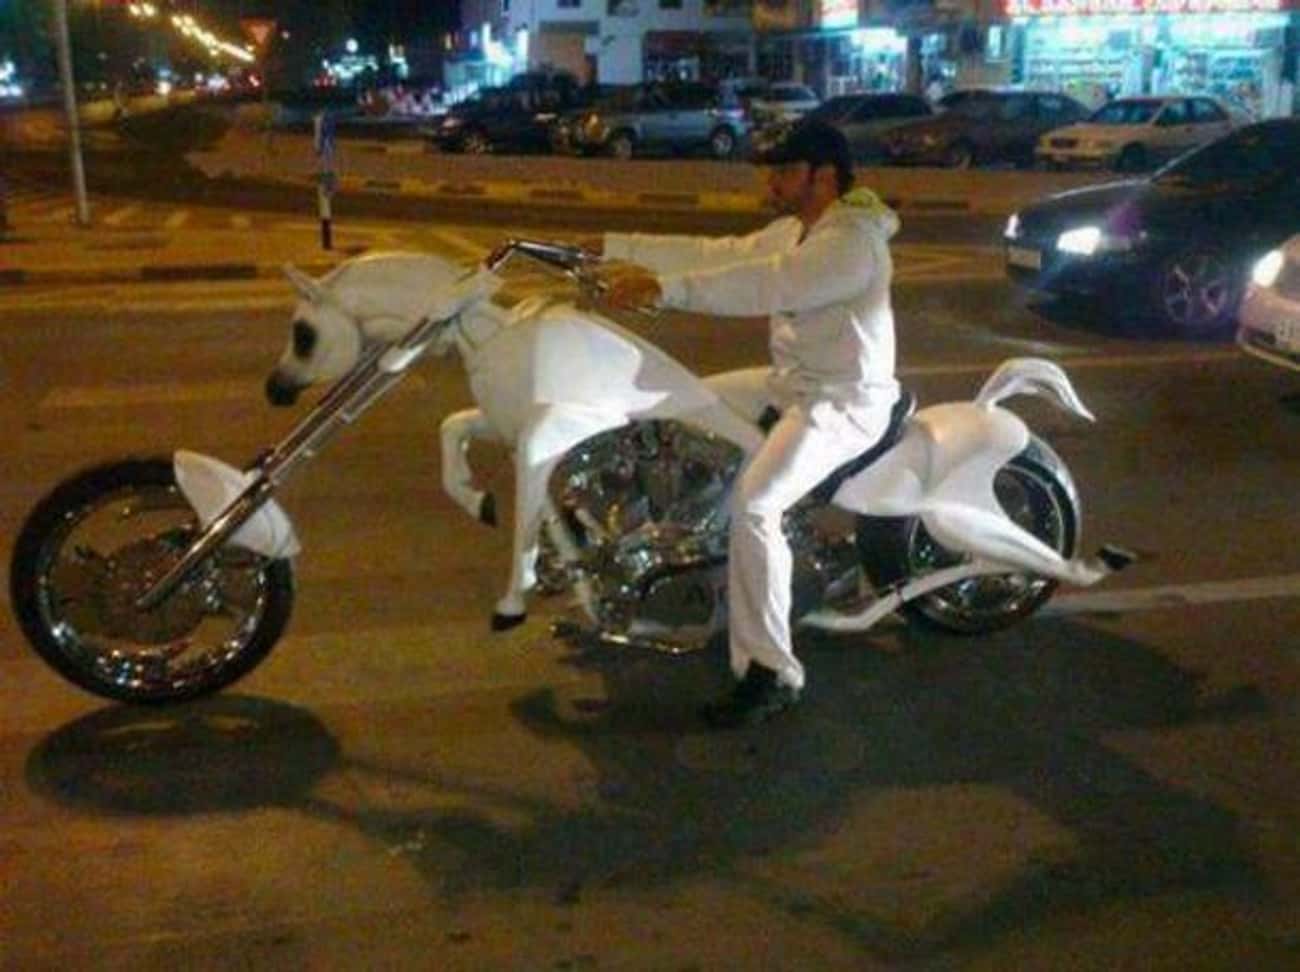 Just Your Typical Horse-cycle